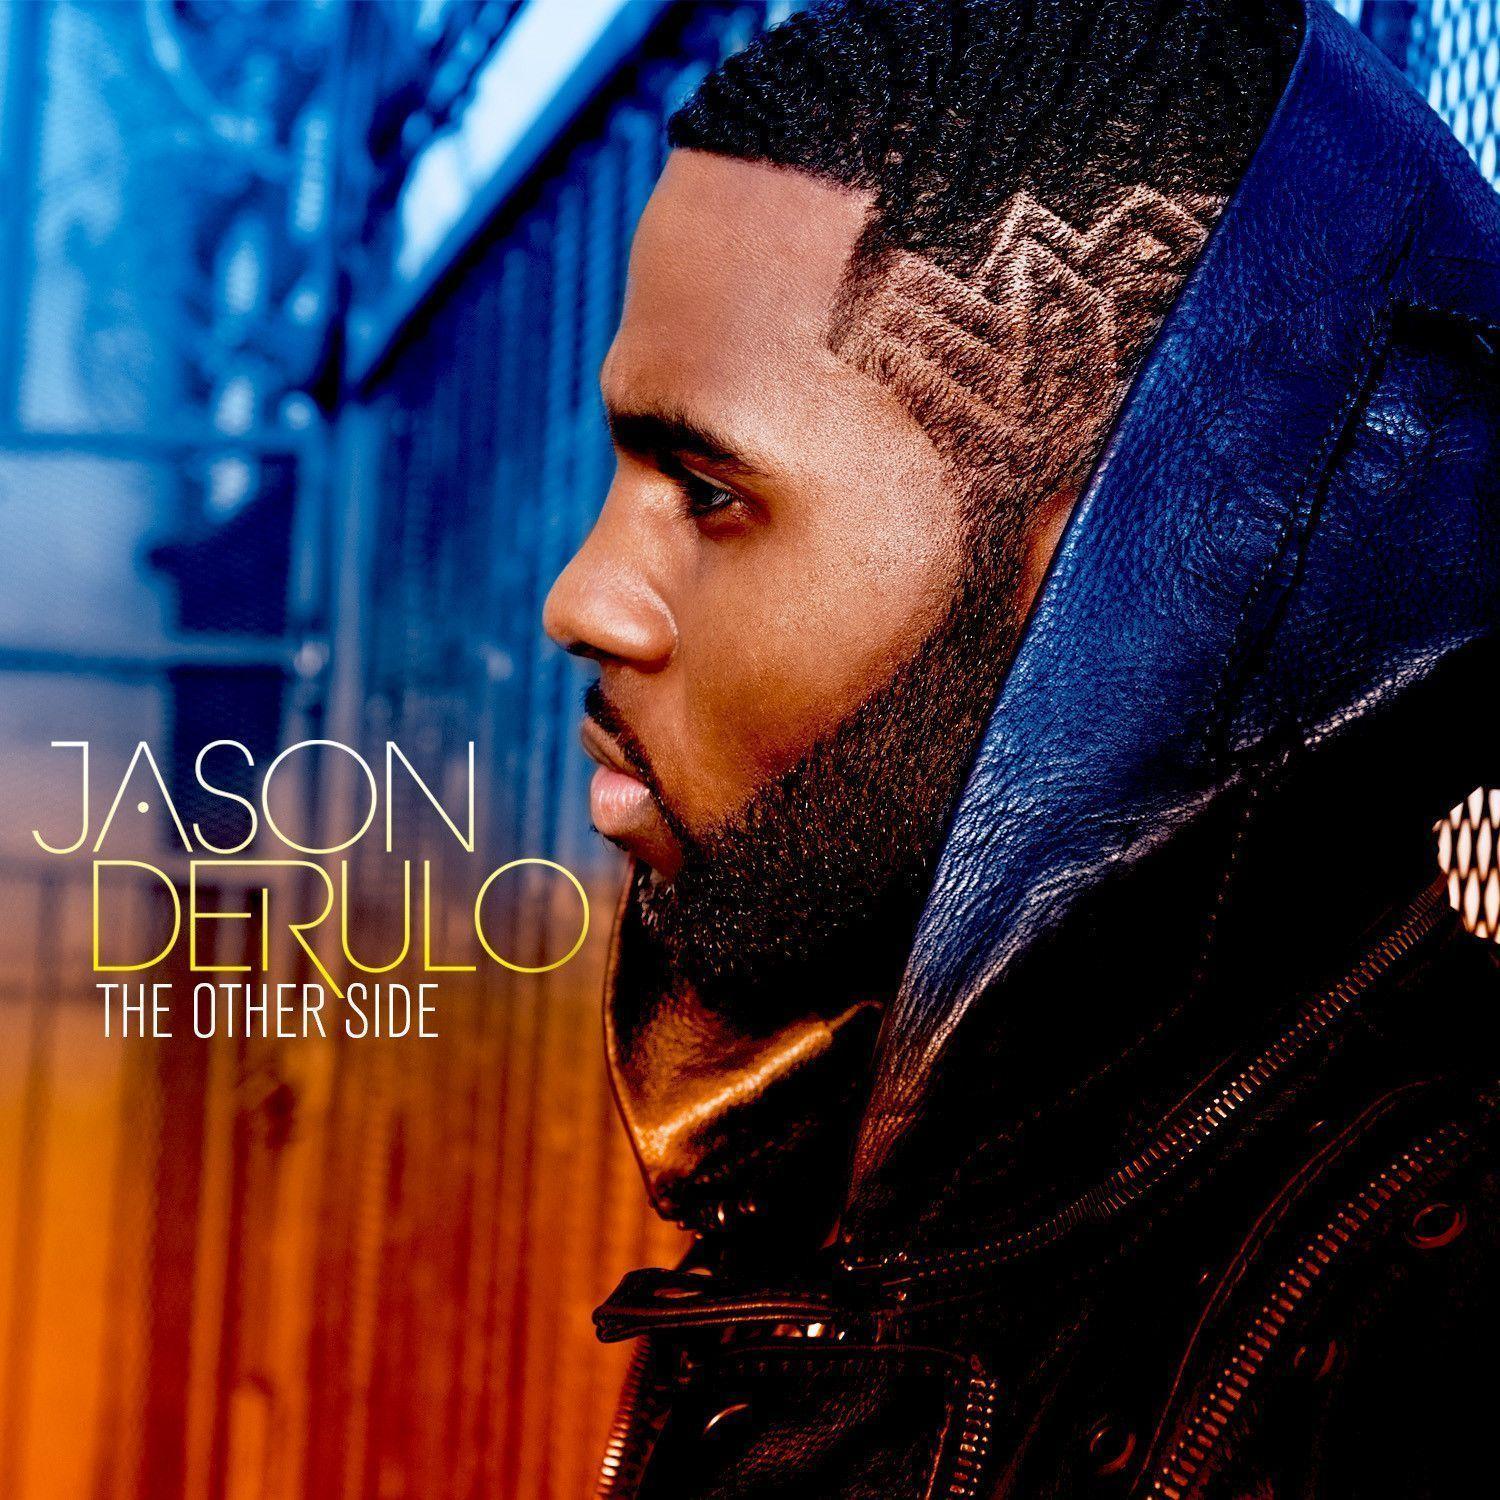 About Jason Derulo&;s, Biography, Songs and Facts